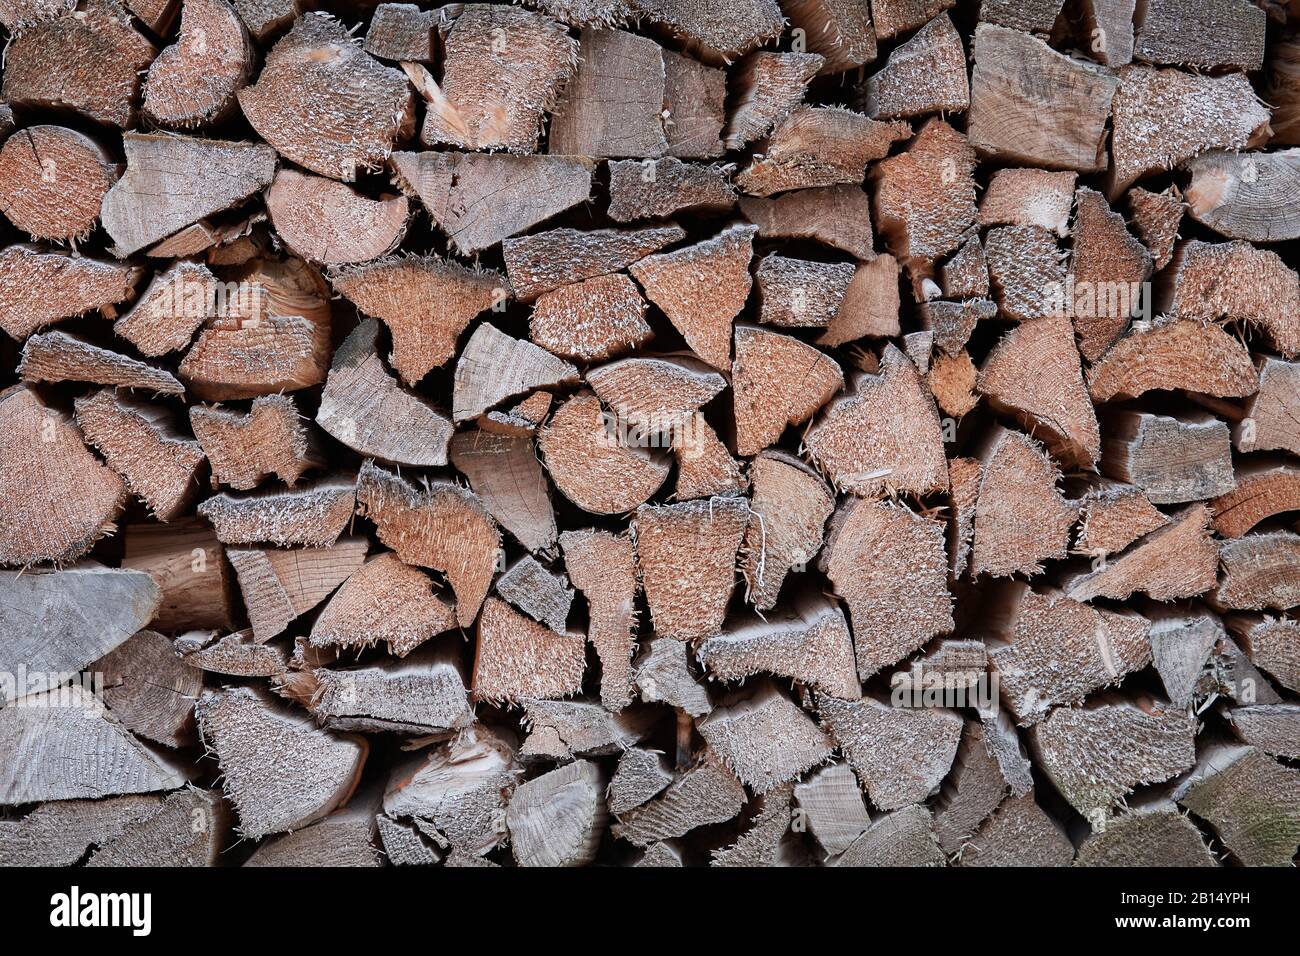 Details of the logs from a woodpile background with different moisture showing colors of wood ranging from grey to warm brown Stock Photo